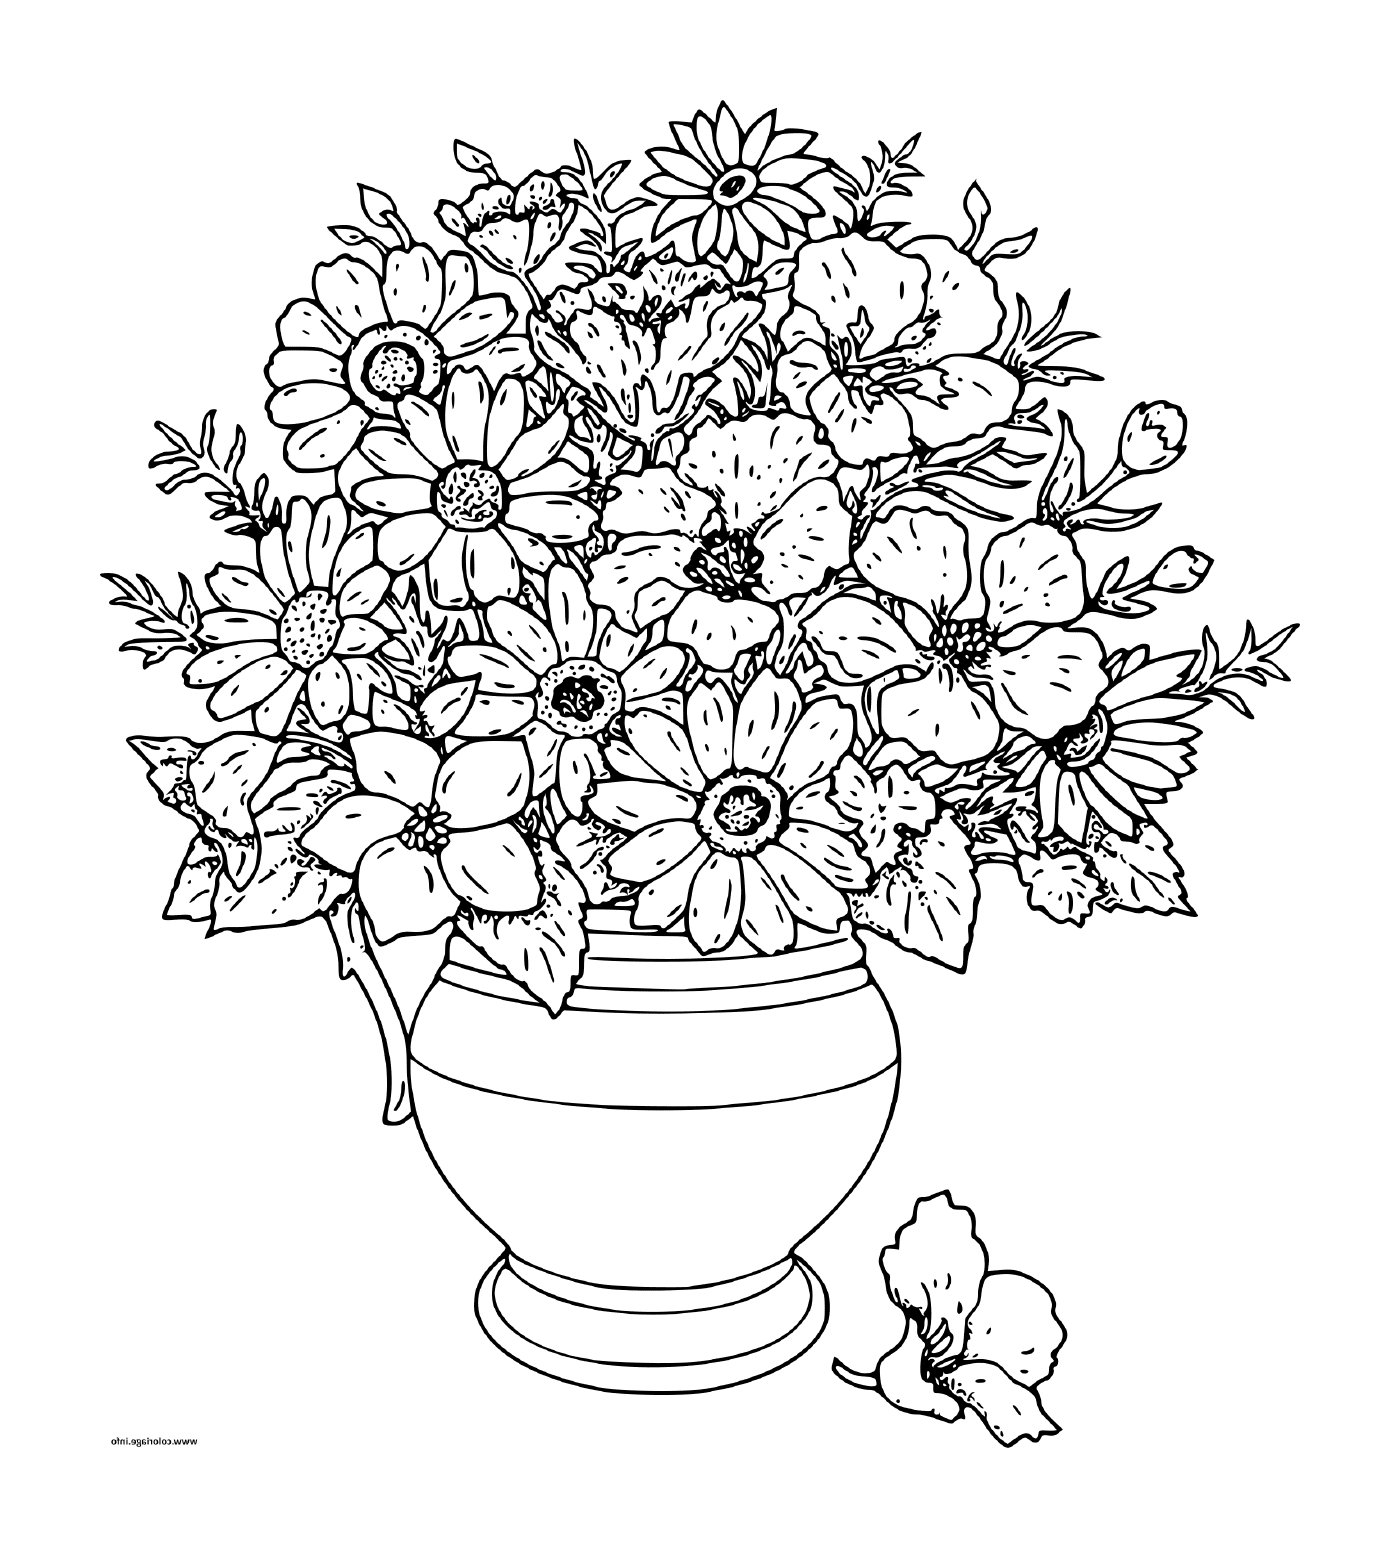  A bouquet of flowers in a vase 